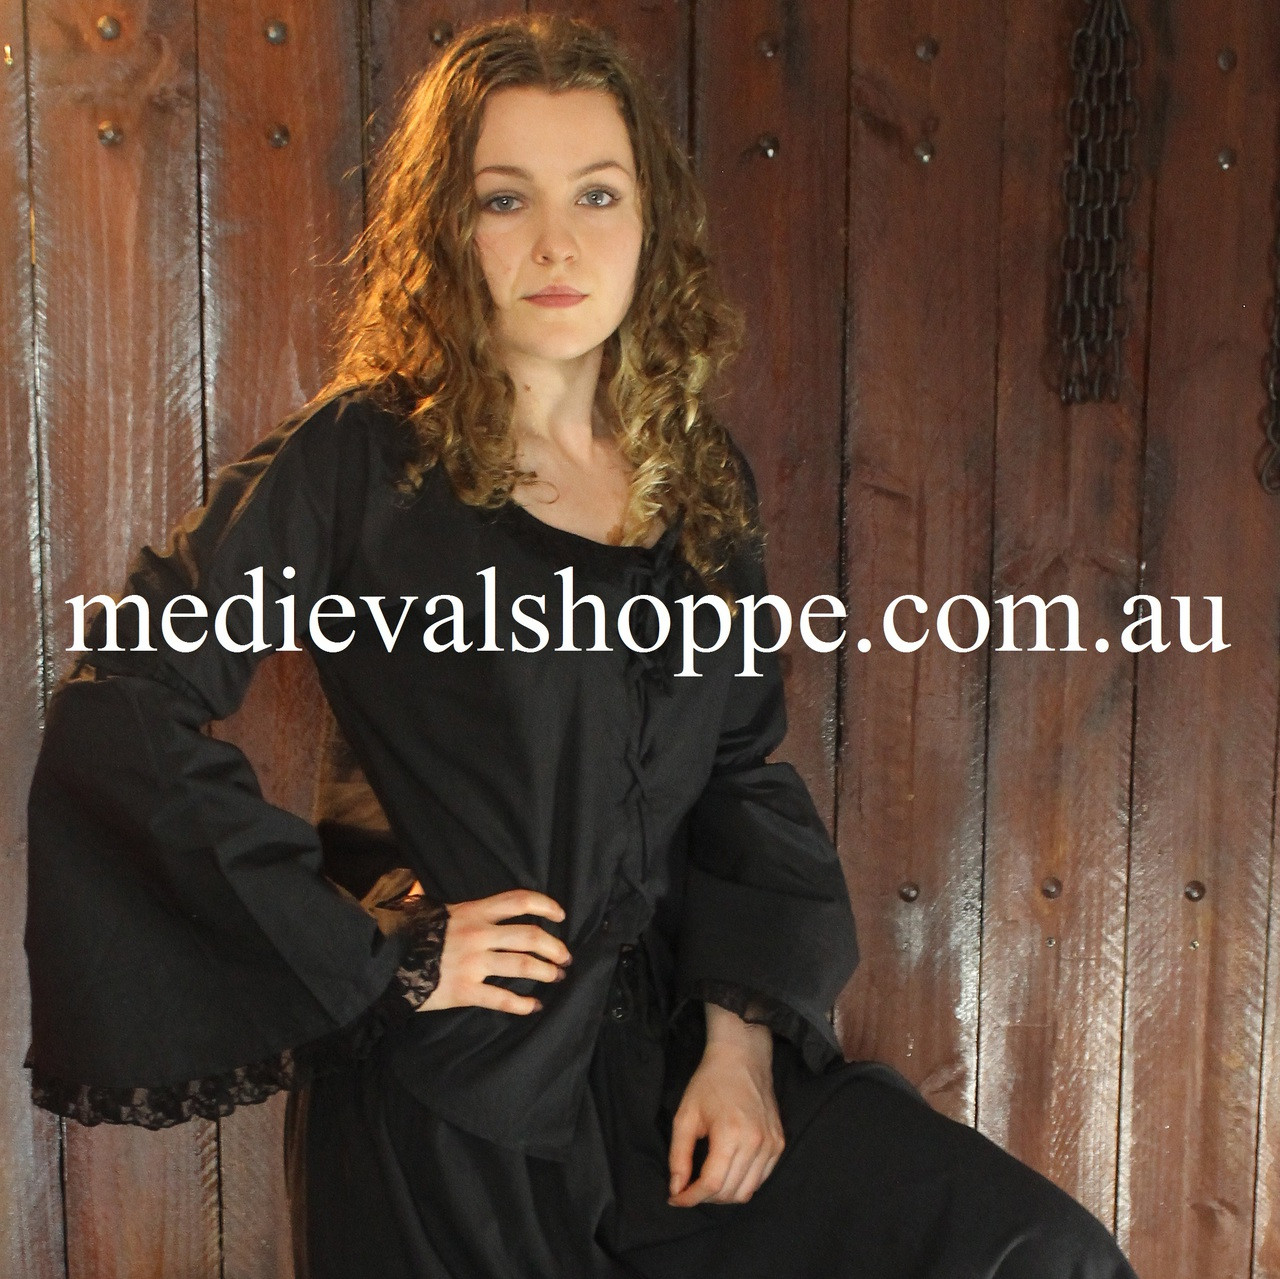 17th or 18th Century Wench Blouse (Black)
Steampunk Blouse